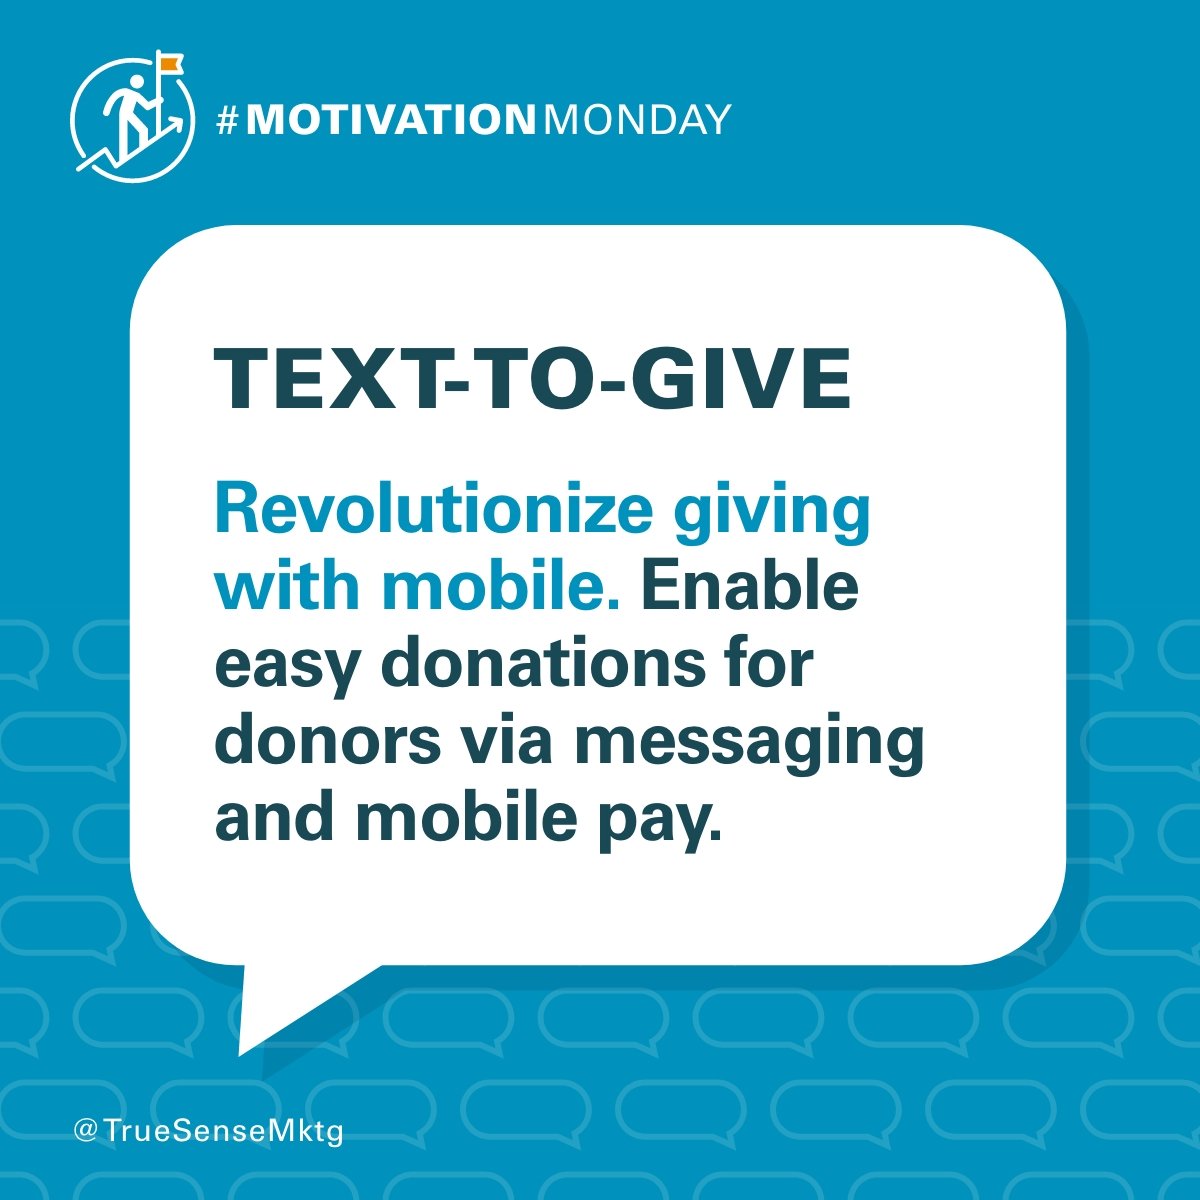 Make donating a breeze with mobile messaging and payment options. Meet your donors right where they are — on their phones! #TextToGive #EasyGiving